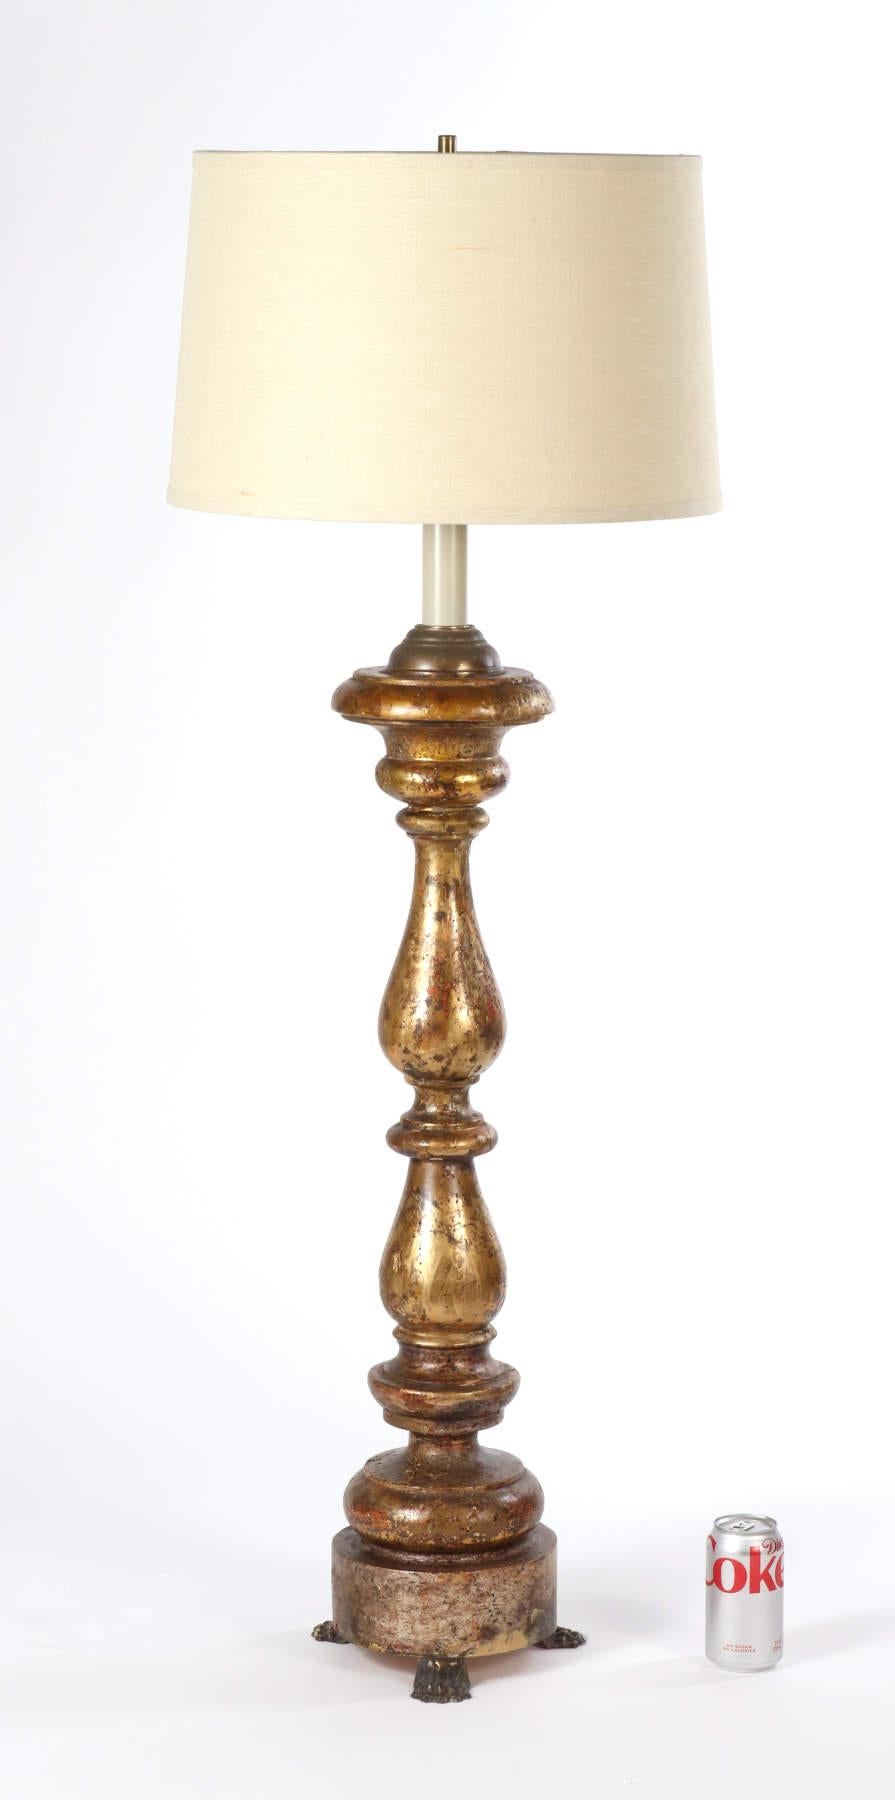 Tall turned and giltwood altar stick mounted as a lamp. 

Measures: 33